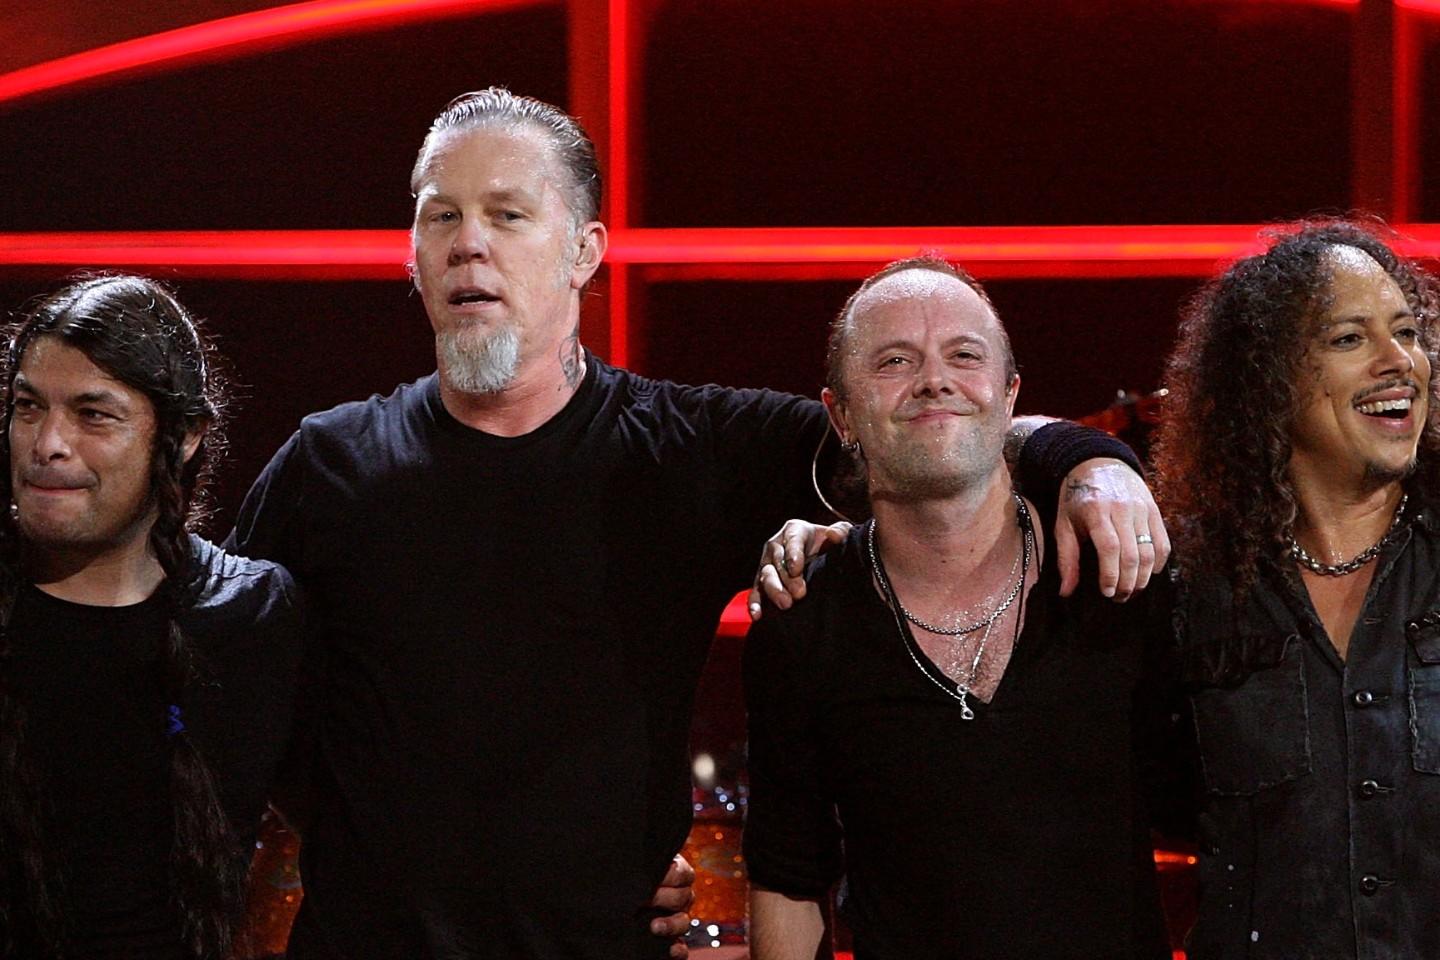 Metallica "S&M2" Is Now The Largest Global Rock Event Cinema Release